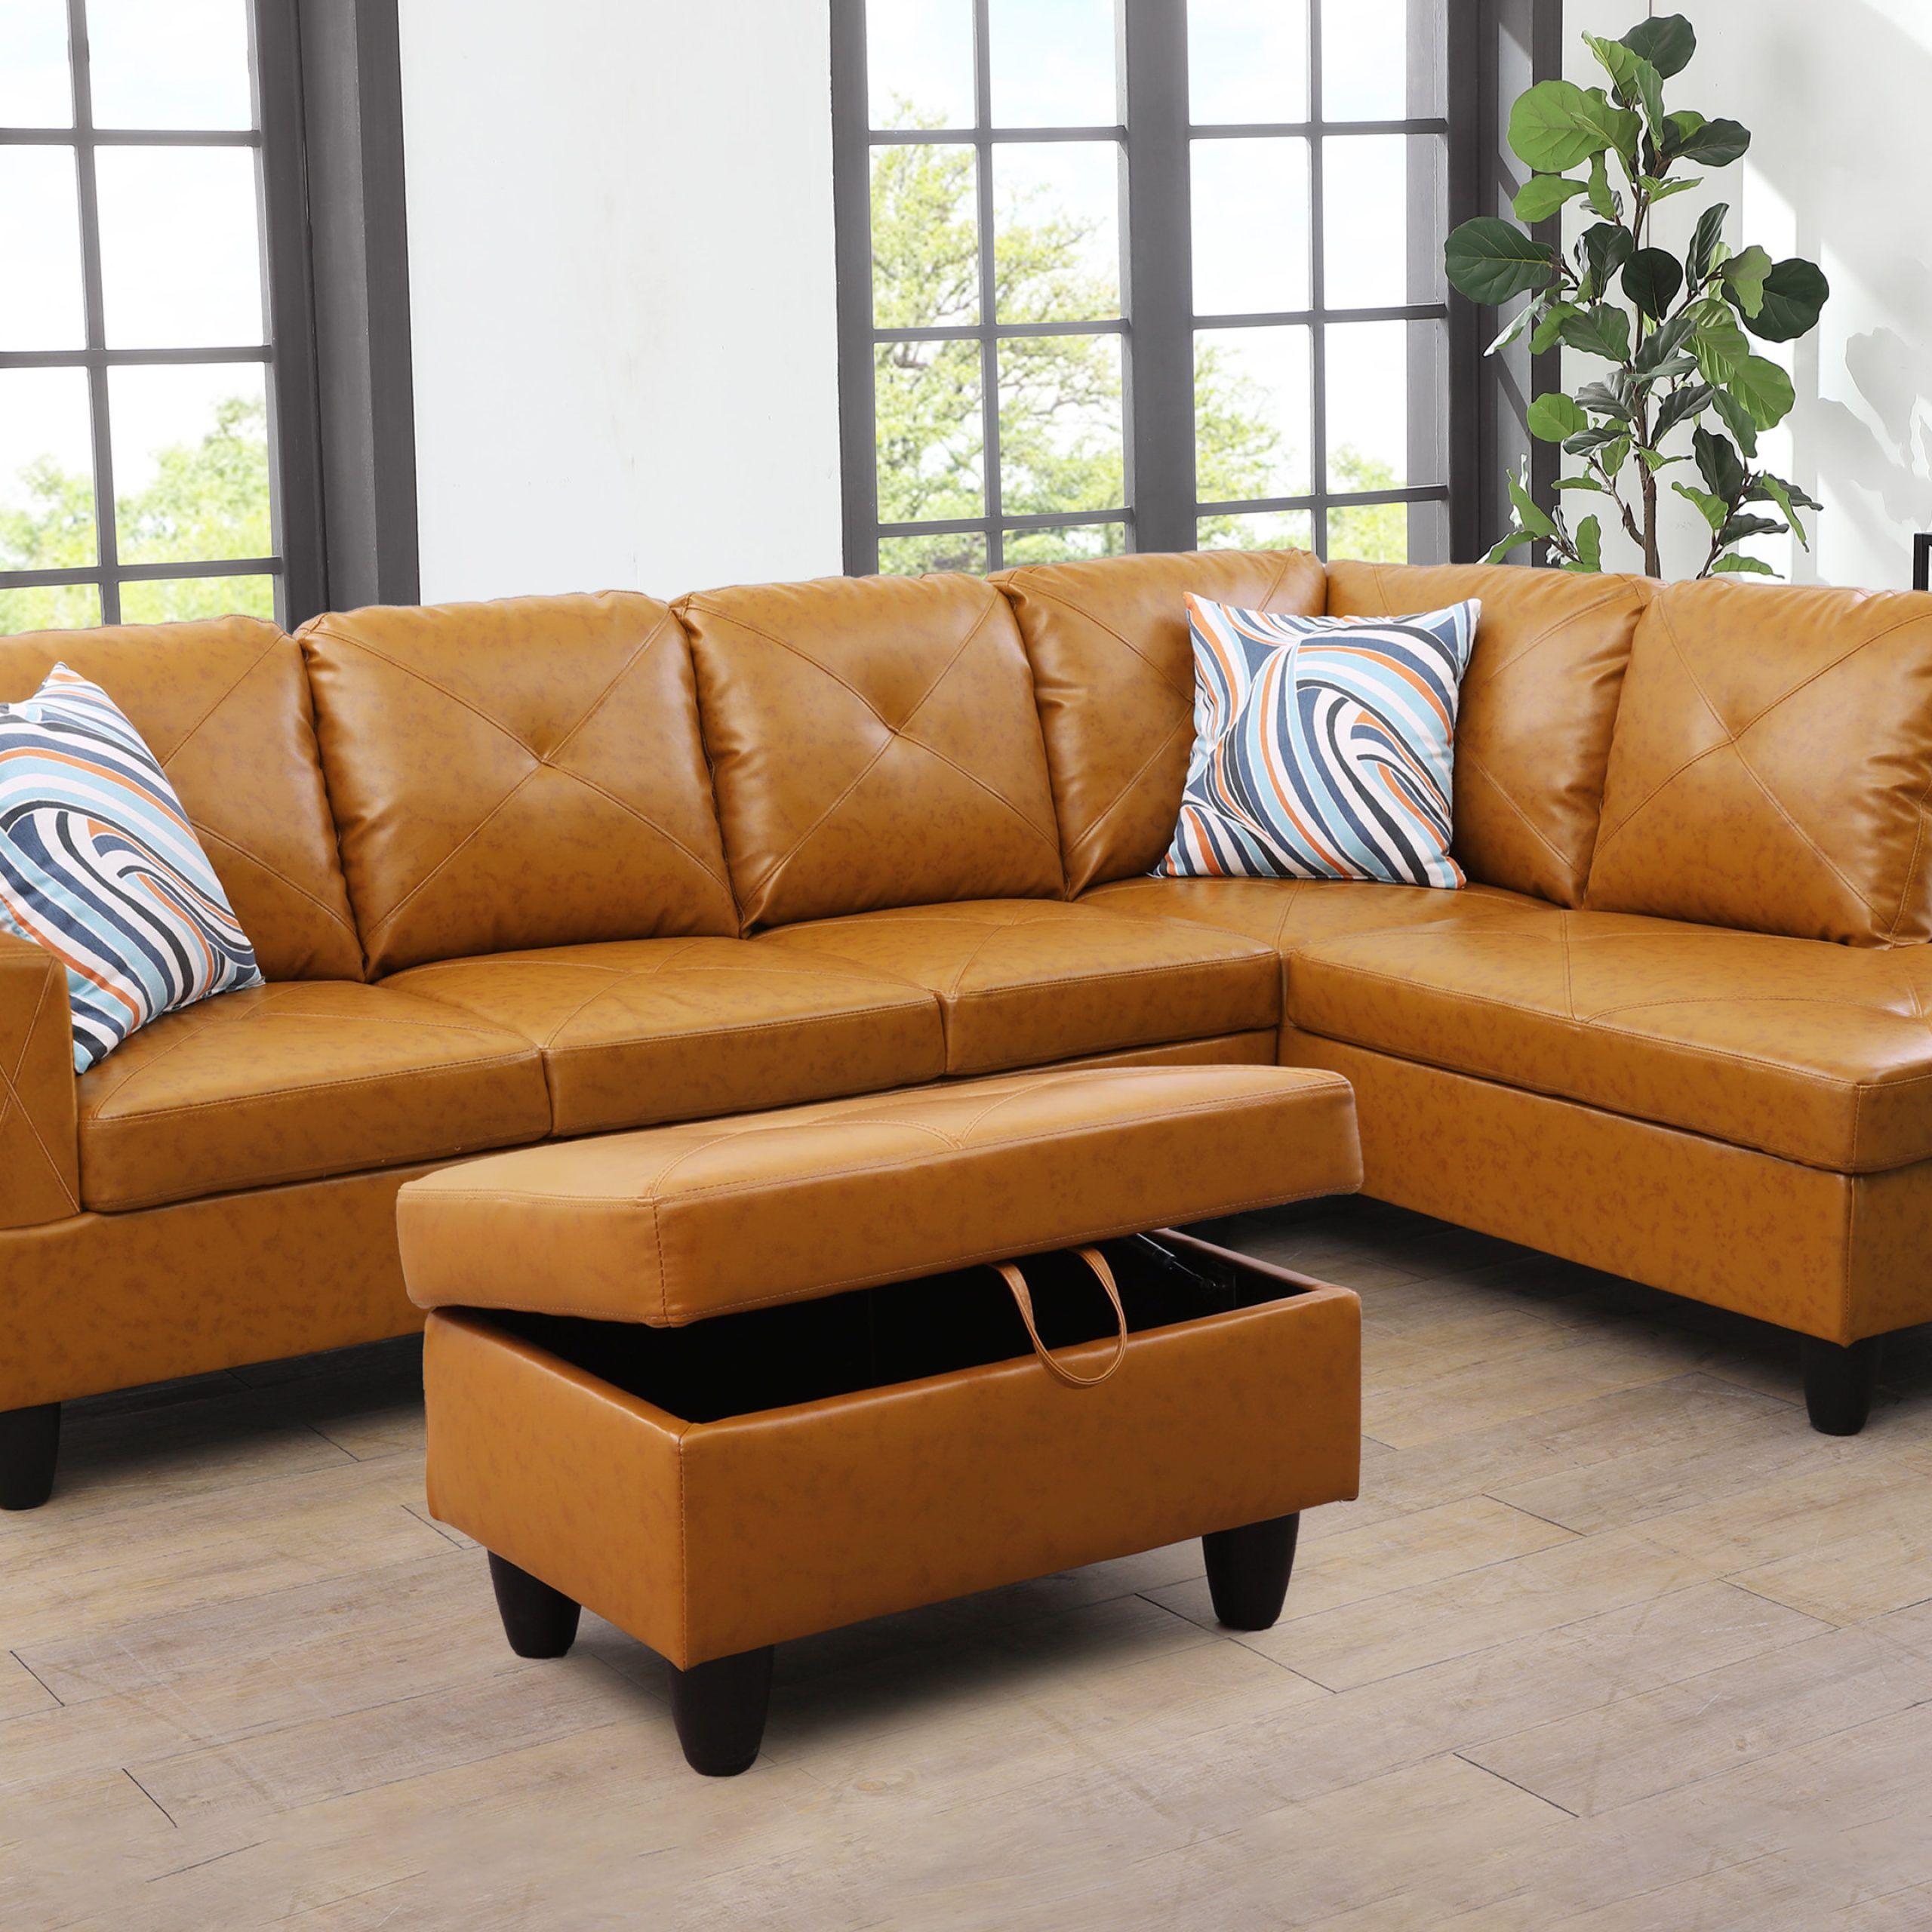 Ebern Designs 3 – Piece Vegan Leather Sectional & Reviews | Wayfair Intended For 3 Piece Leather Sectional Sofa Sets (Photo 6 of 15)